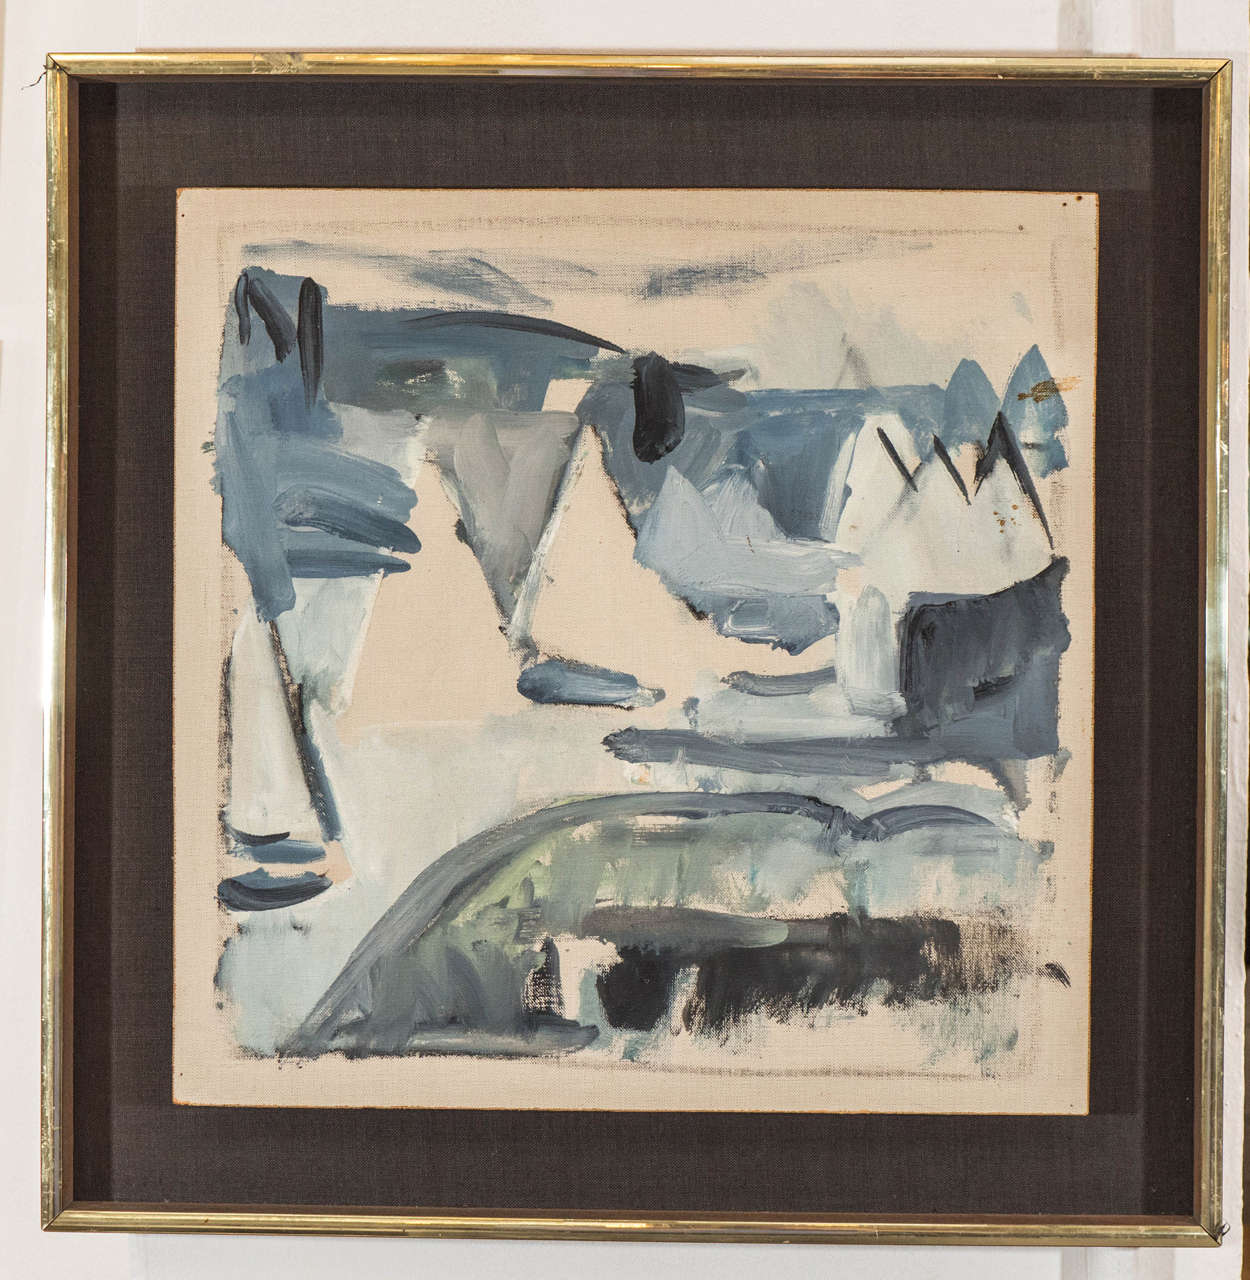 A vintage oil on board abstract painting, in shades of blue and grey, frame included, in wood with brass accents. Good vintage condition with minor scratches to surface and some age appropriate wear.